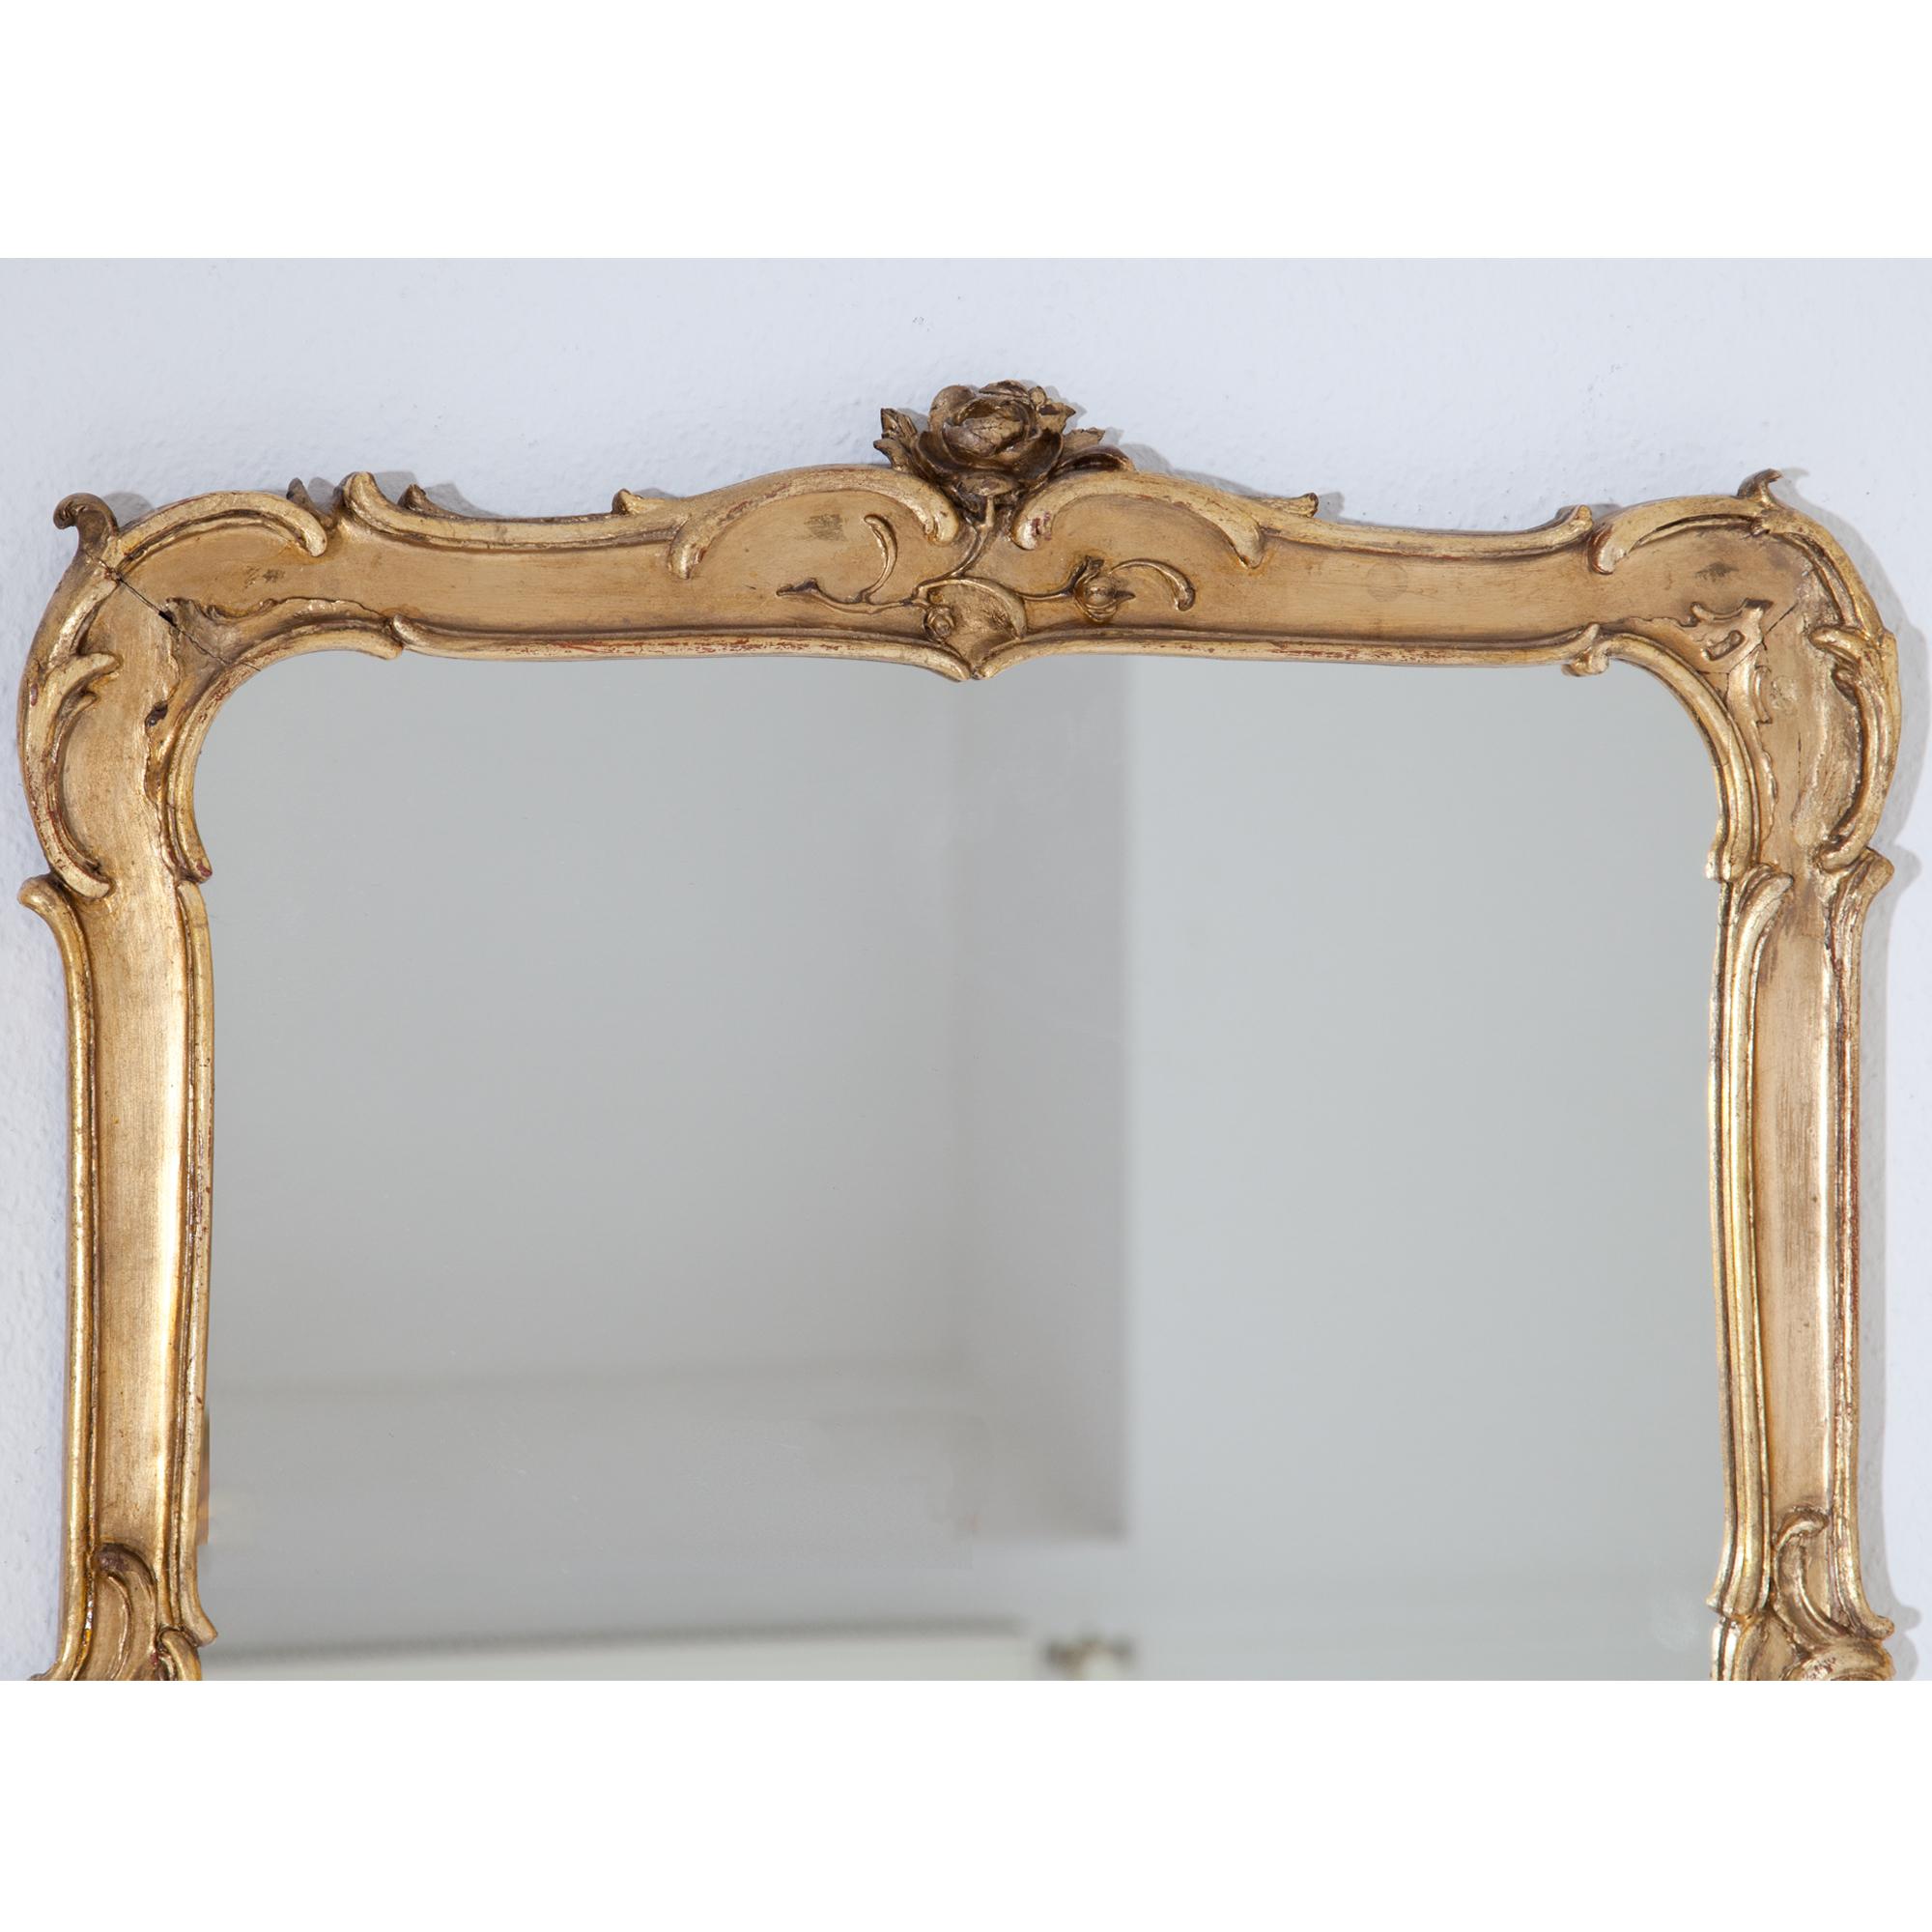 Glass Pair of Gilt Rococo-Style Wall Mirrors, 19th-20th Century